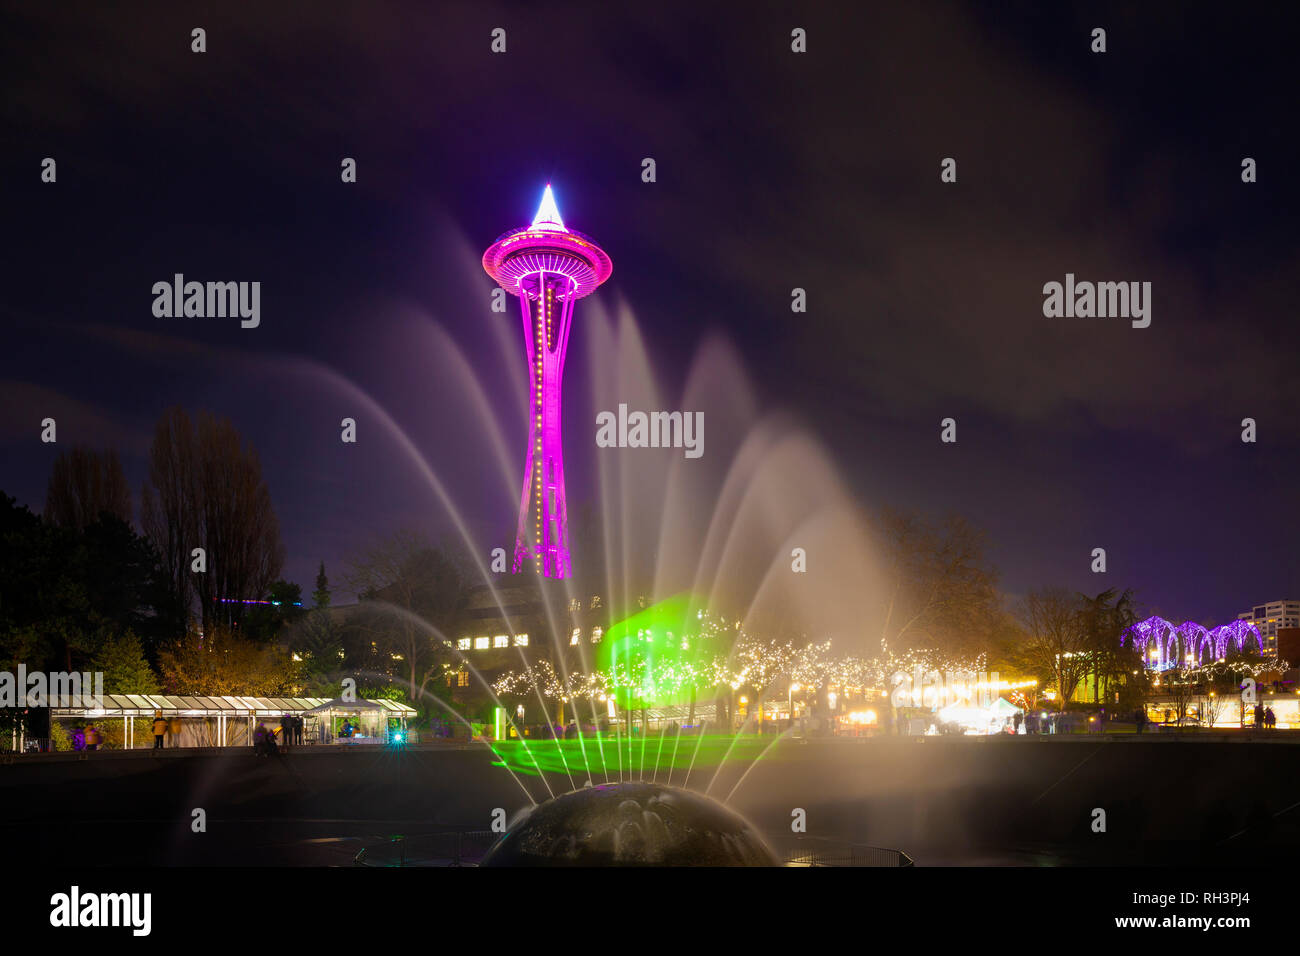 WA17059-00...WASHINGTON - The Space Needle and International Fountain in the Seattle Center on New Years Eve 2018. Stock Photo